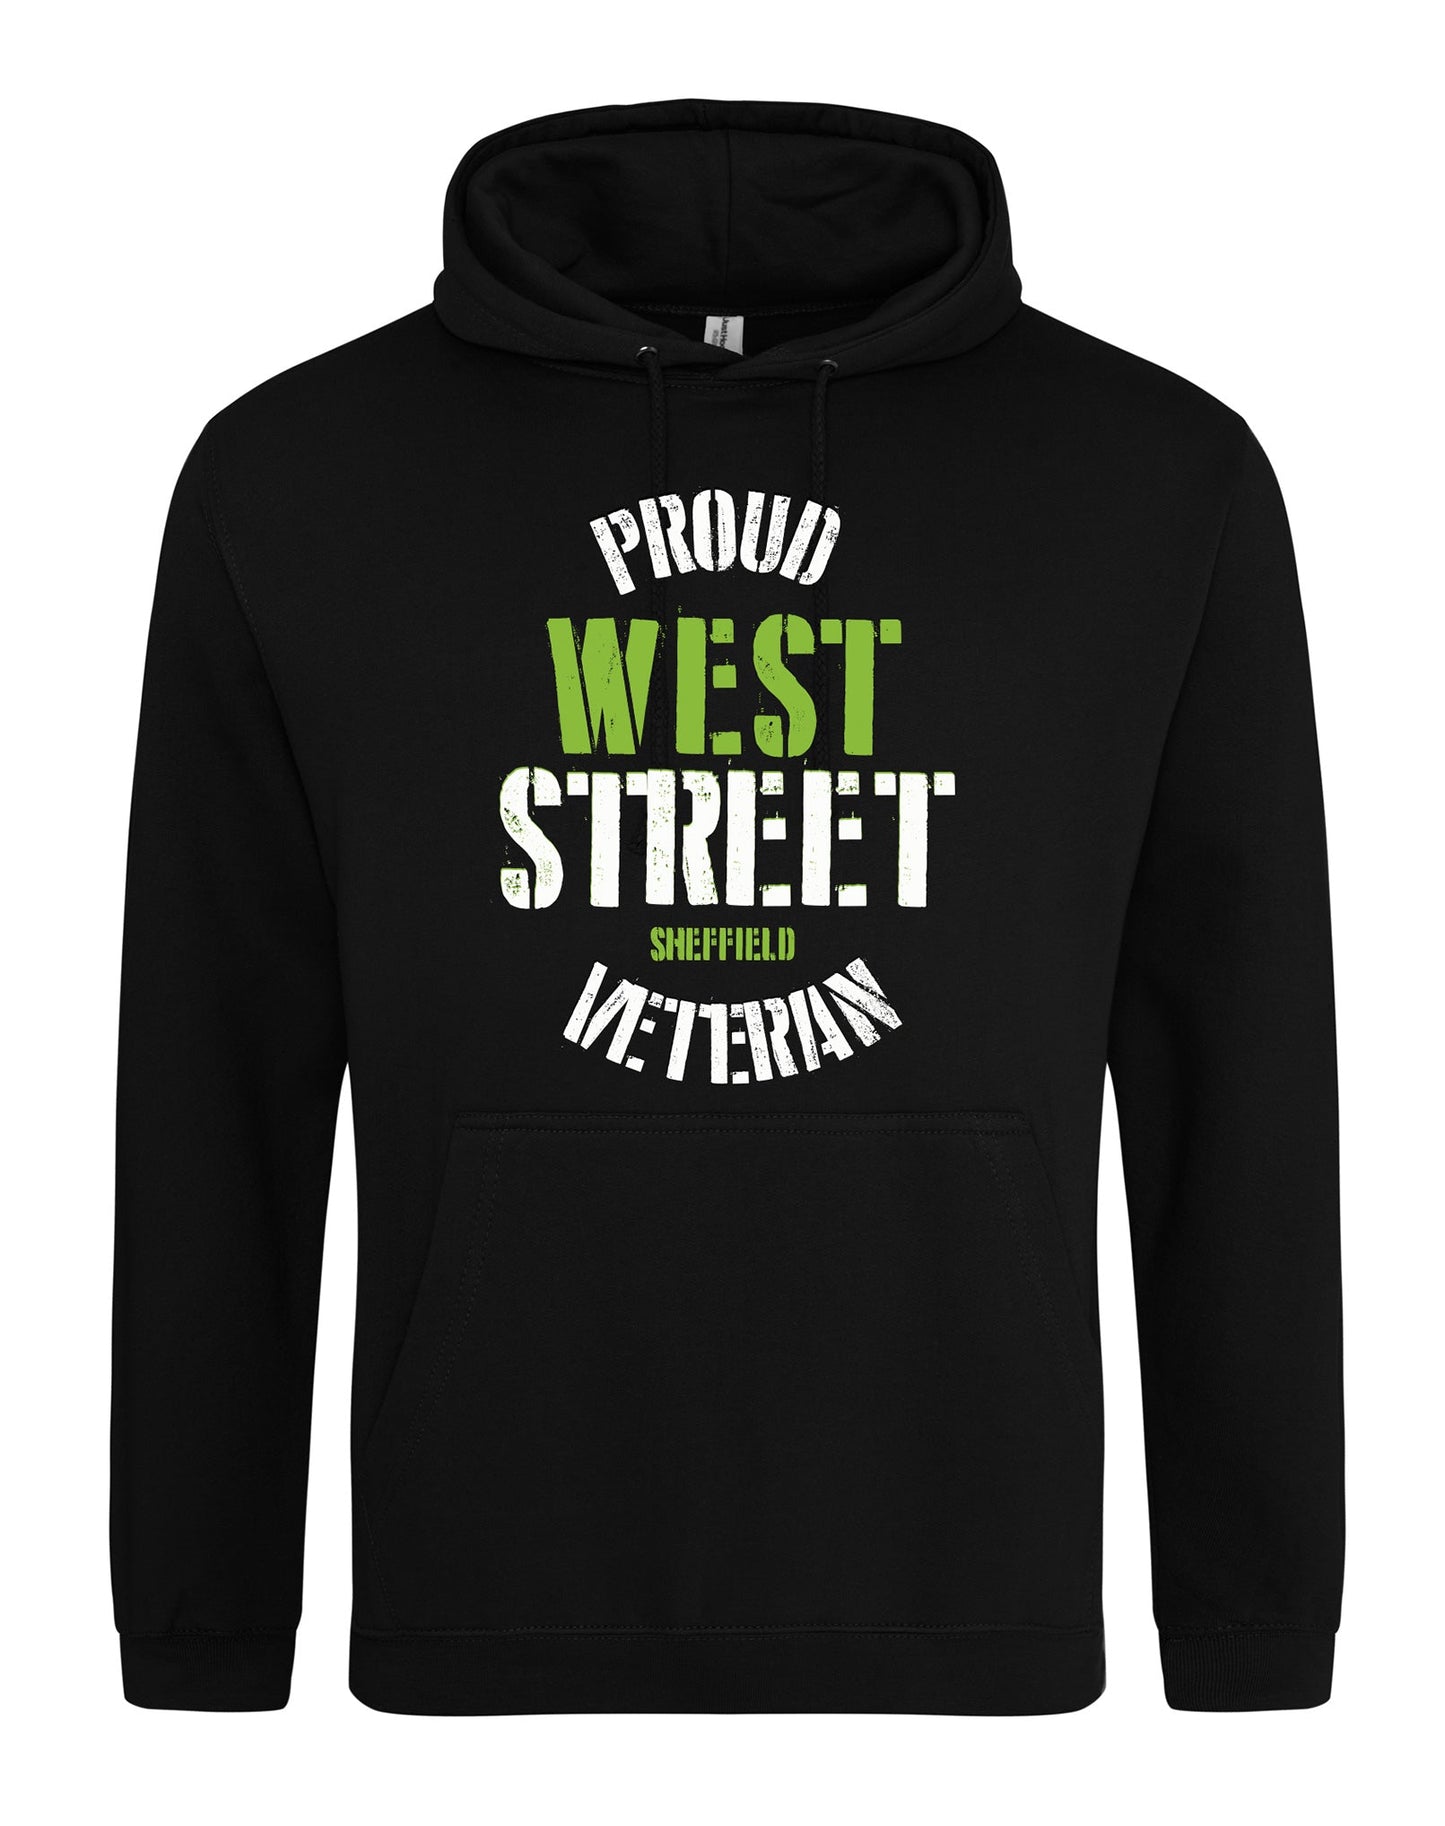 West Street Veteran unisex fit hoodie - various colours - Dirty Stop Outs